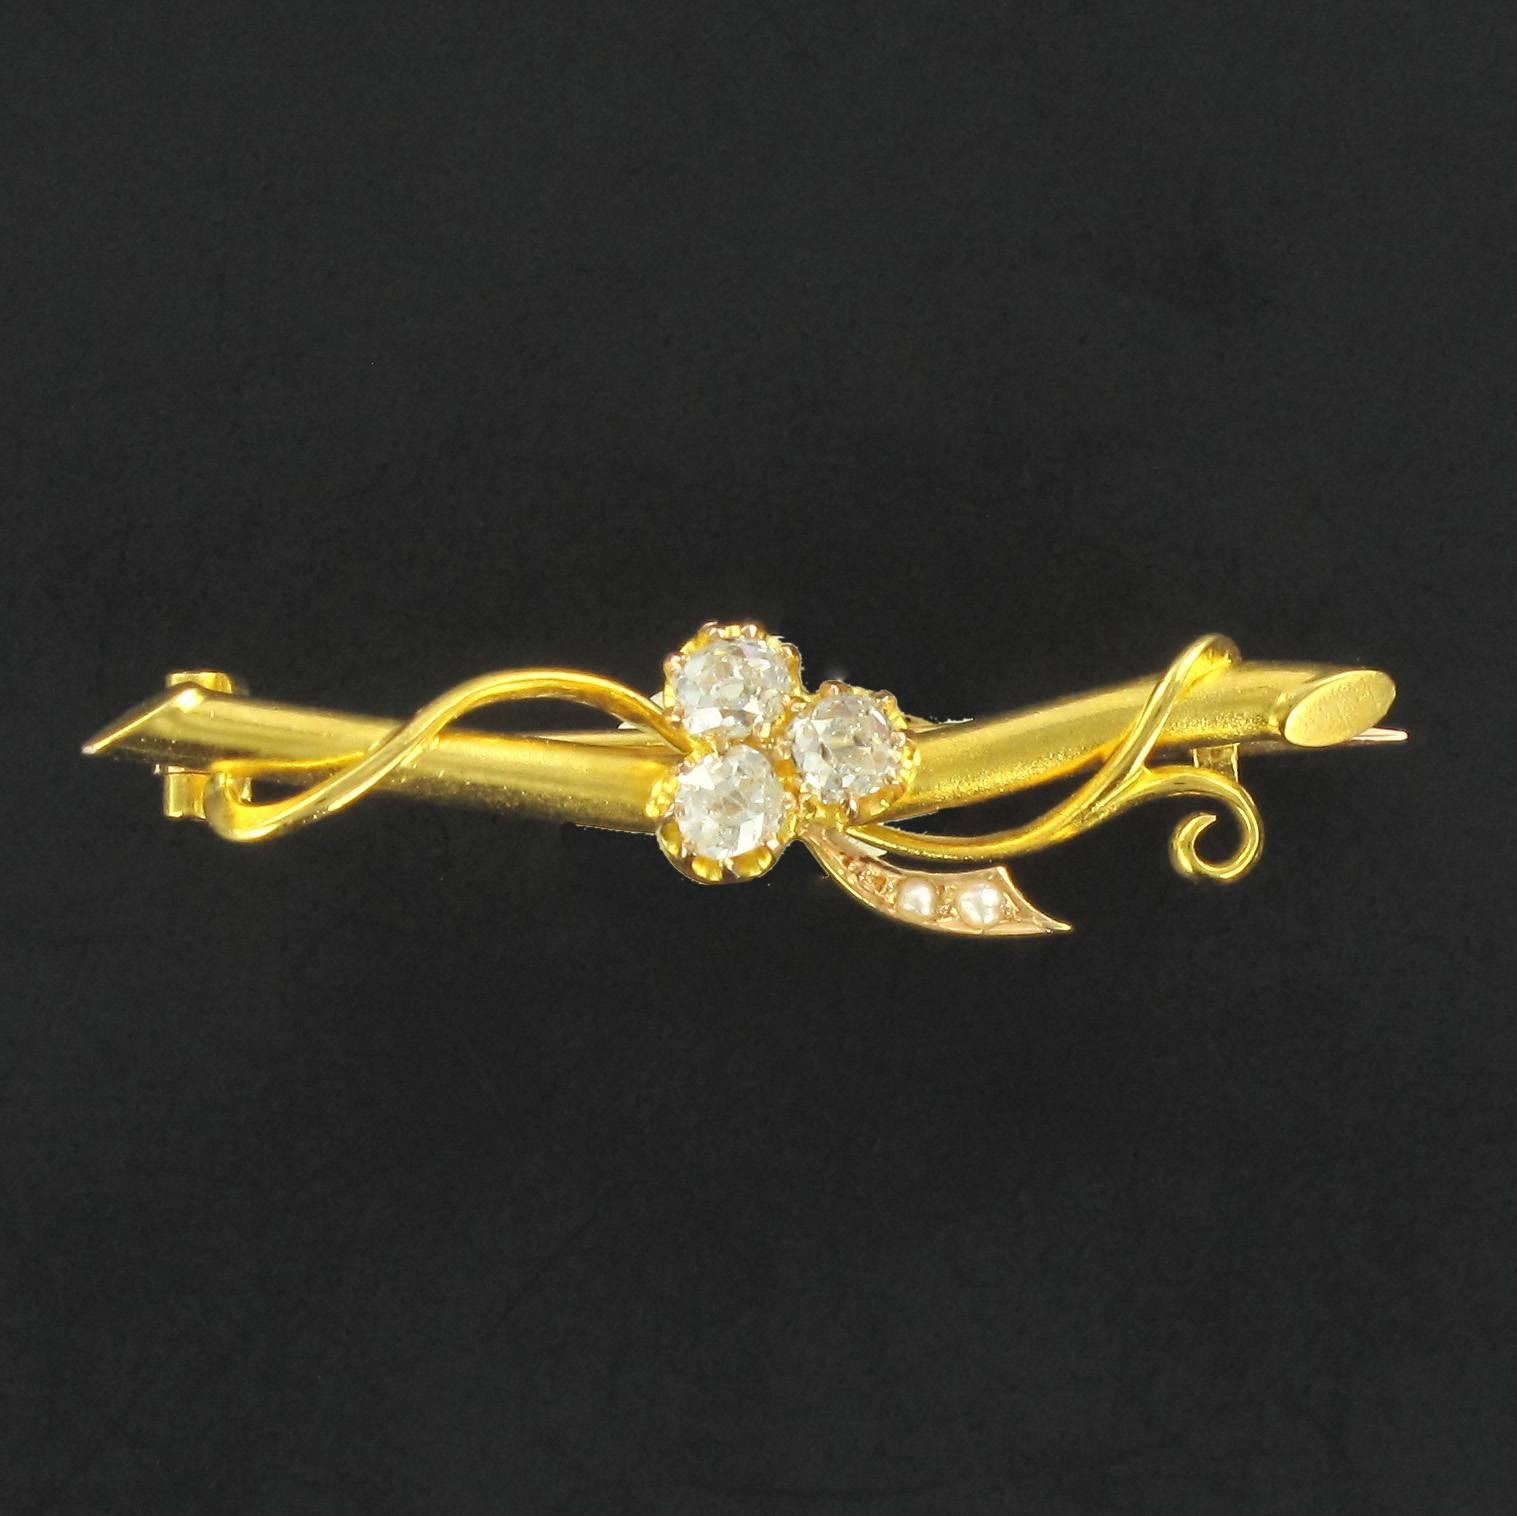 18 carat Yellow gold brooch, eagle head hallmark.
This lovely gold brooch is composed of a gold branch entwined with a gold cord on which is a 3 leaf clover set with 3 extremely high quality antique cut diamonds and 2 half pearls set in the stalk.